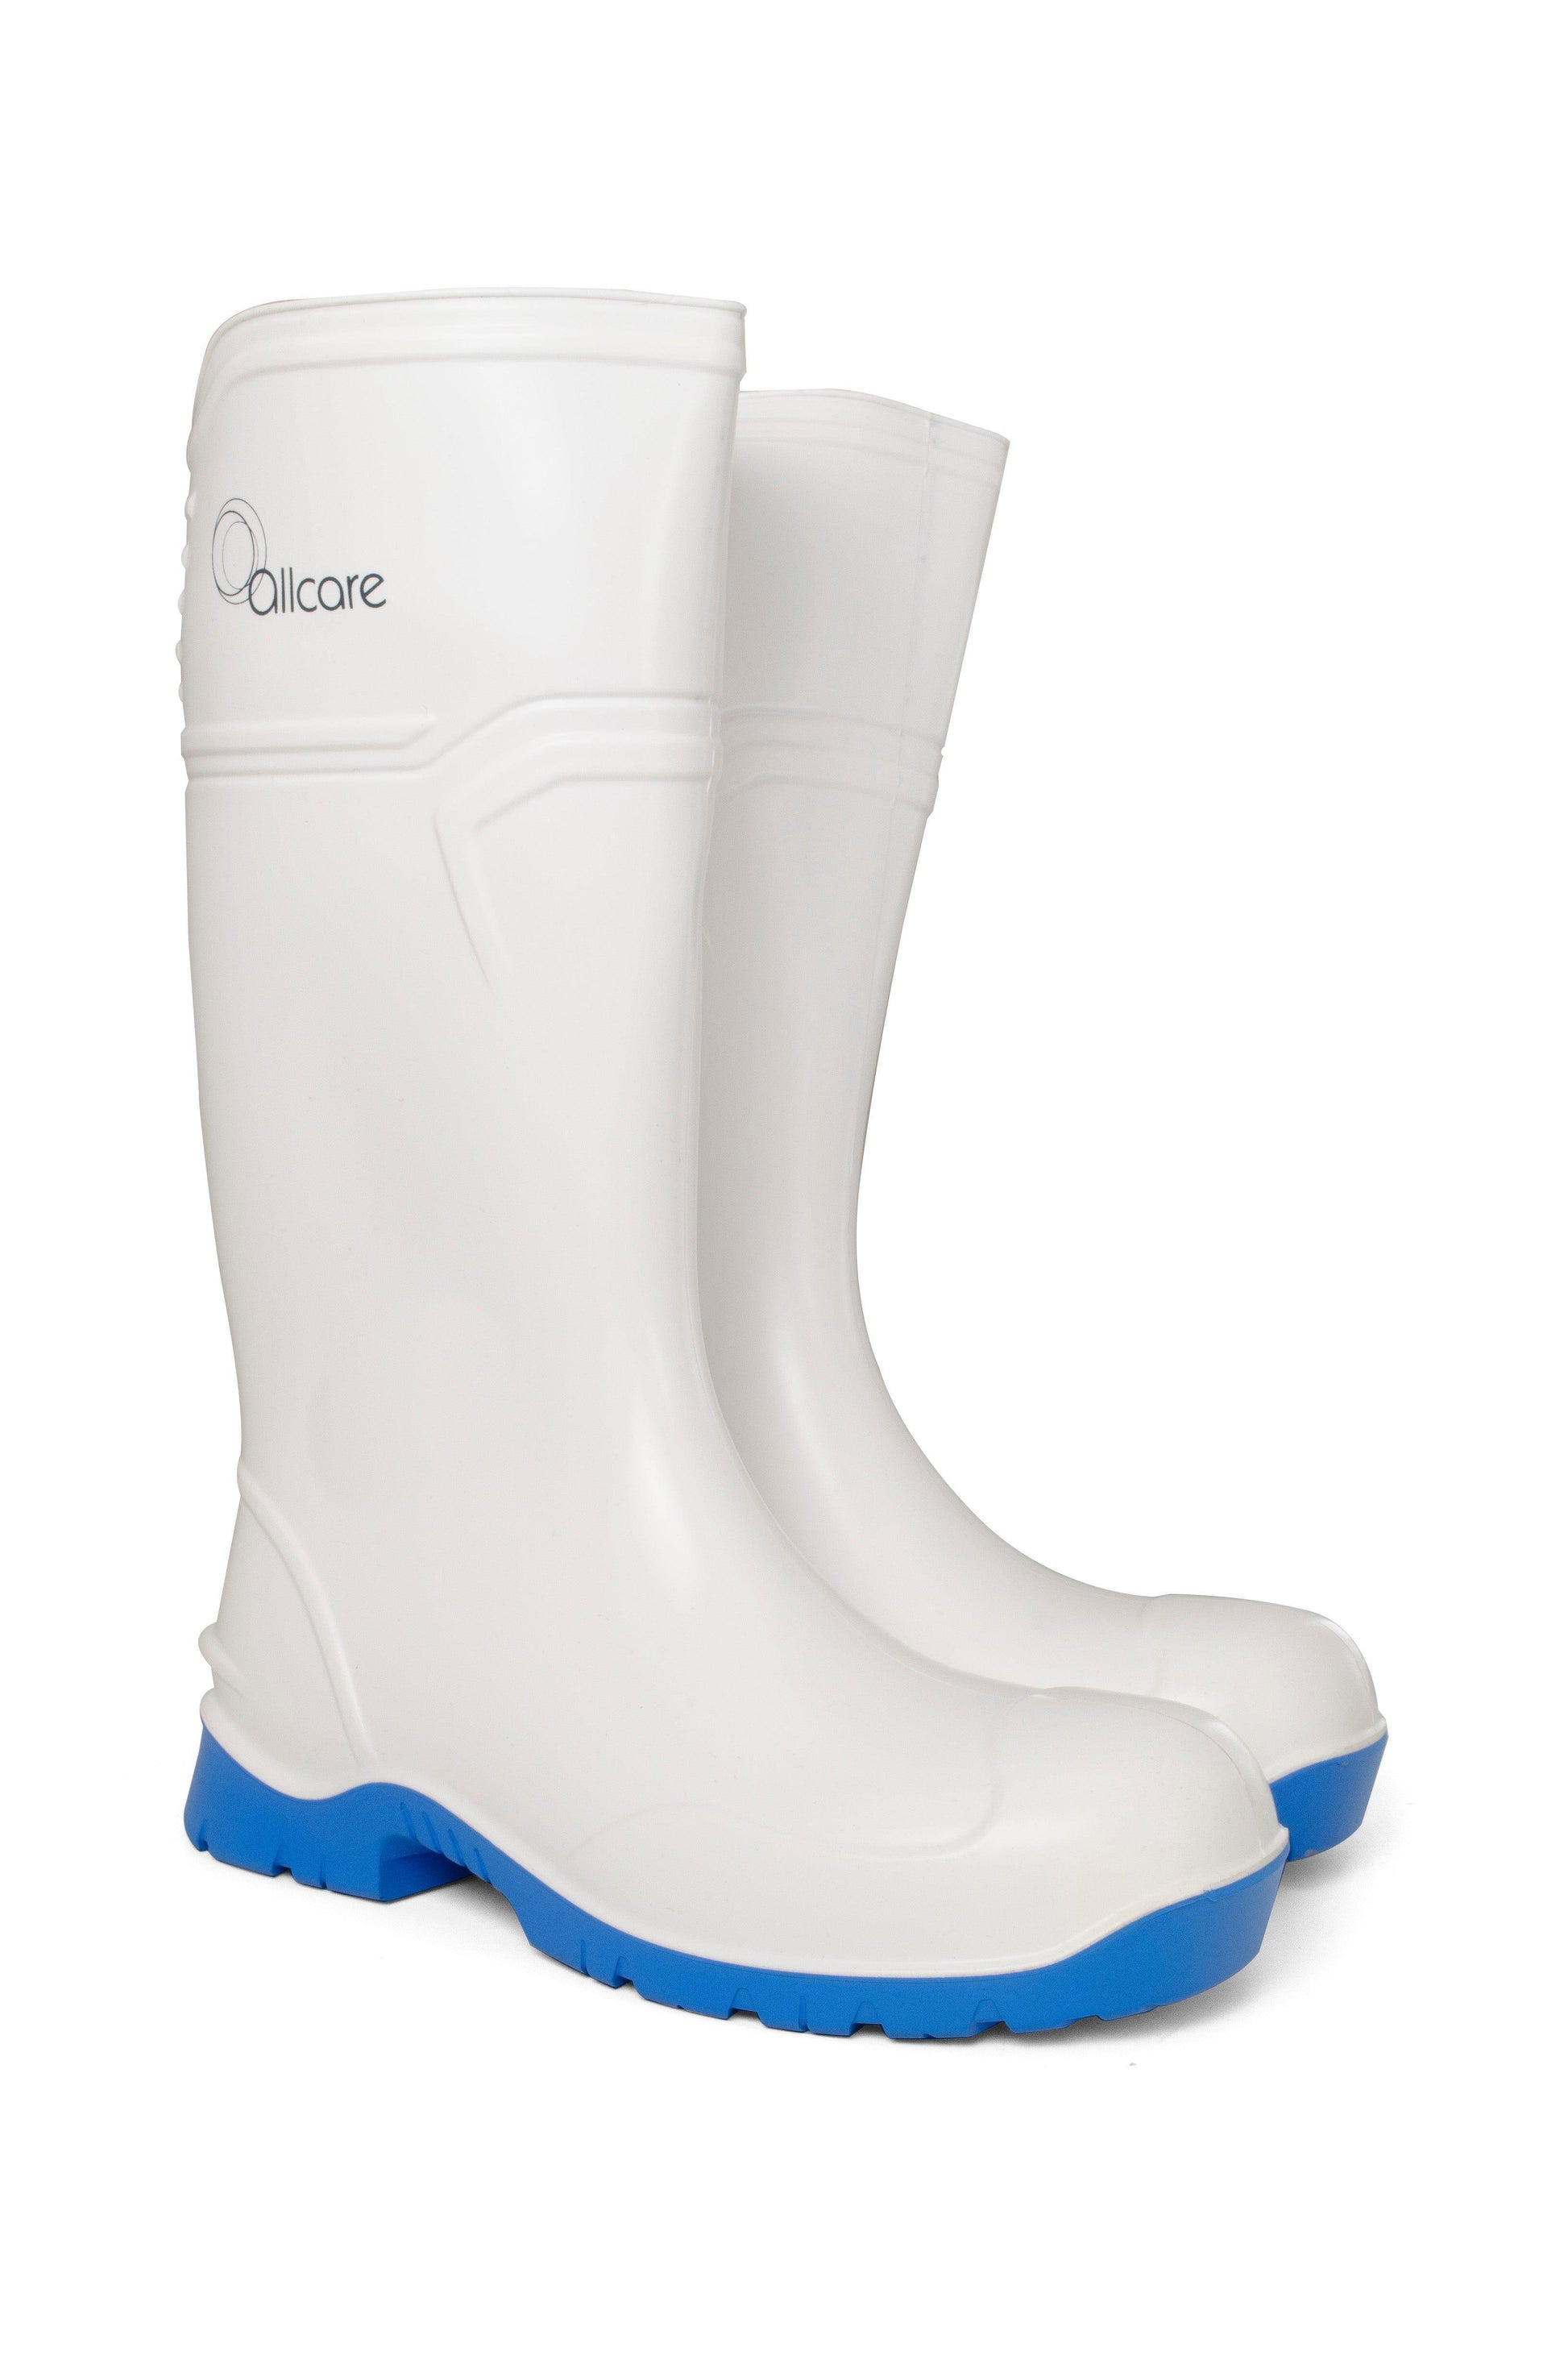 Image of Allcare Gumboot PU Safety White